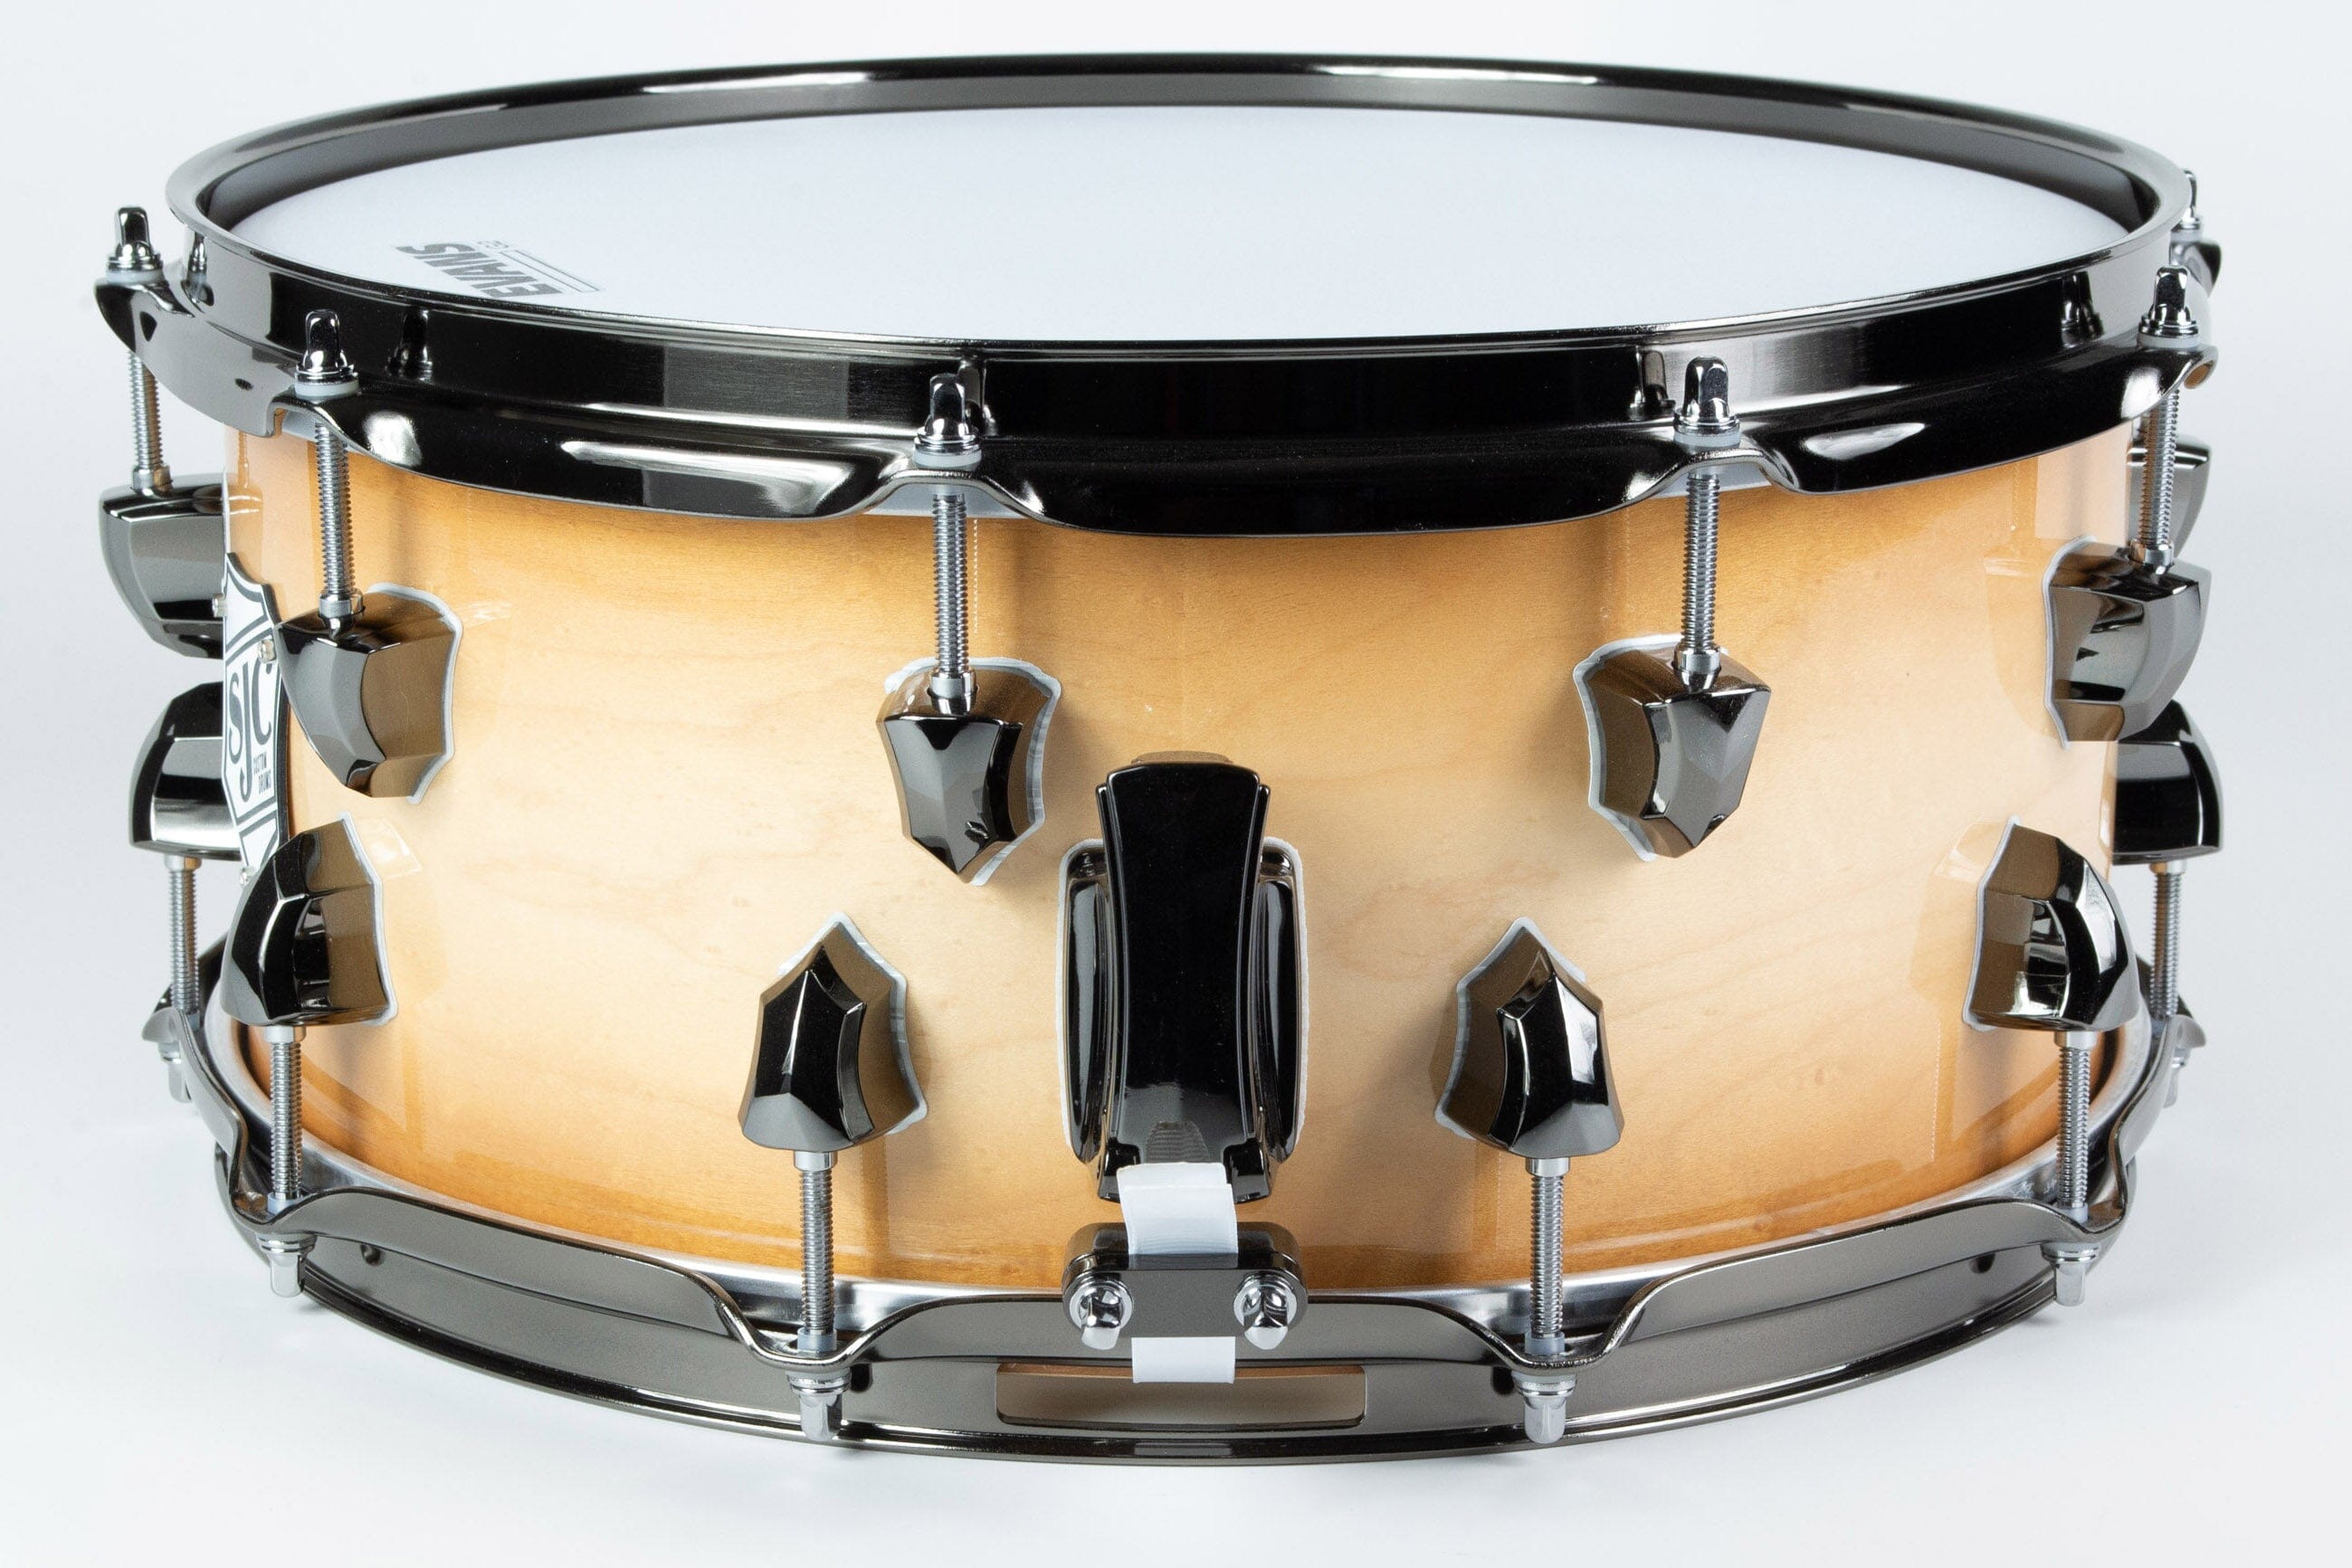 Builder's Choice - Natural to Amber Burst 6x14 Snare